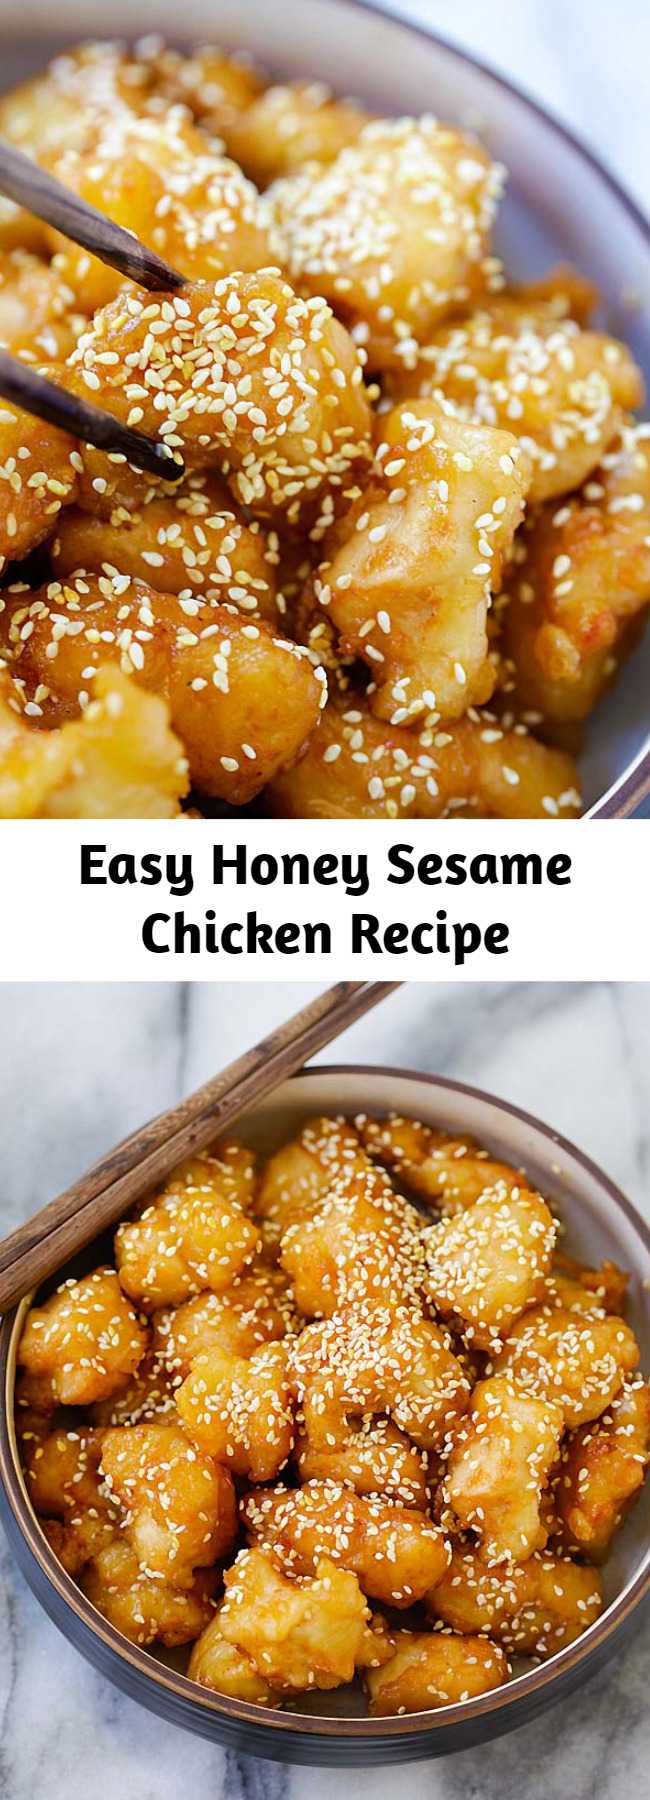 Easy Honey Sesame Chicken Recipe - Best ever honey sesame chicken. Easy honey sesame chicken recipe with fried chicken pieces in a sticky sweet and savory honey sesame sauce. #honey #chicken #dinner